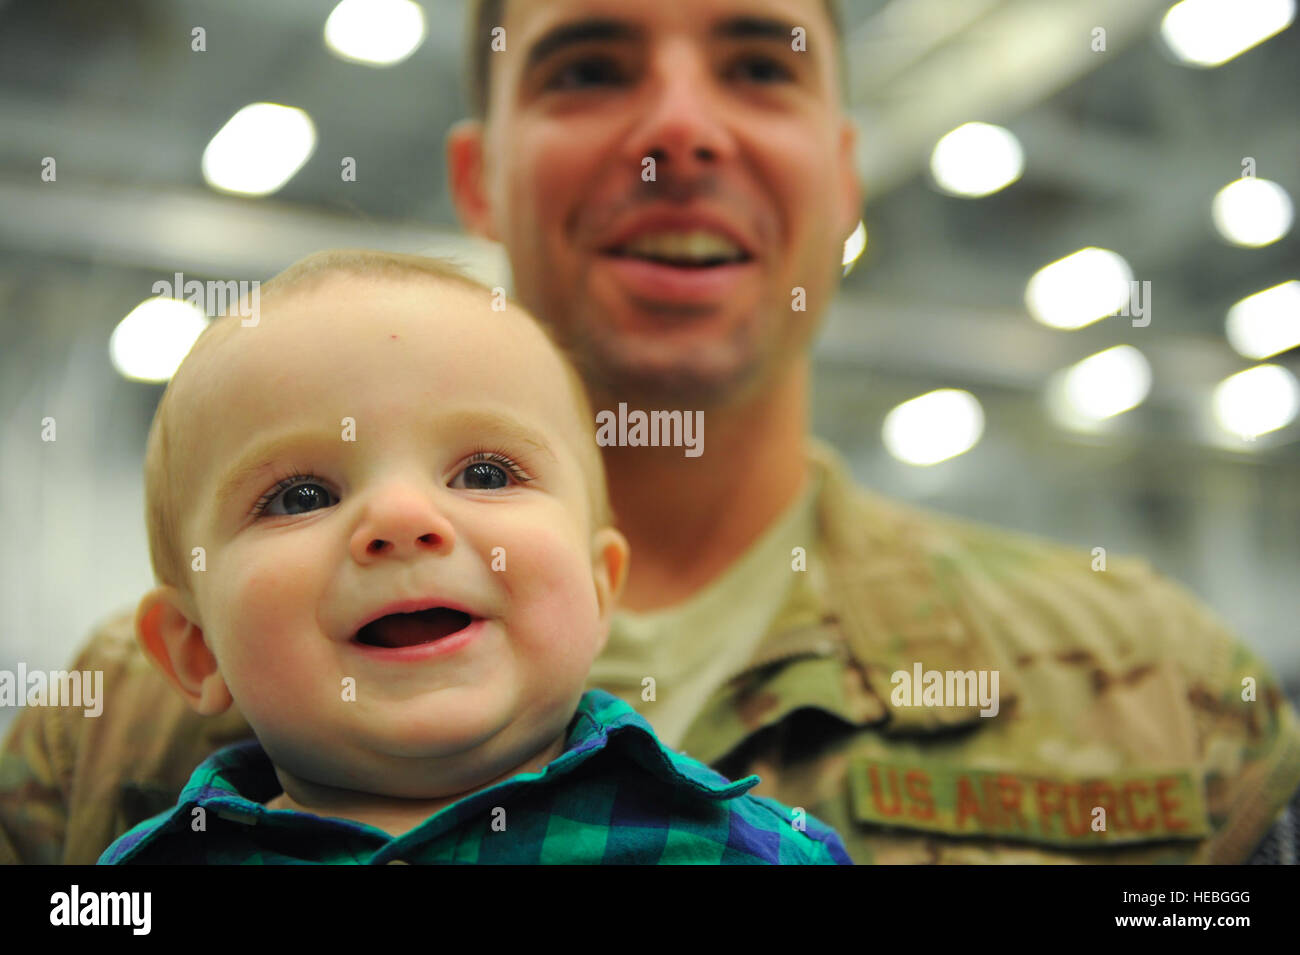 Aiden Robillard smiles in the arms of his father, Staff Sgt. Tim Robillard, Jan. 12, 2014, at Hurlburt Field, Fla. Robillard was met by his wife and son after returning home from deployment. Robillard is a 801st Special Operations Aircraft Maintenance Squadron electric and environmental systems maintainer. (U.S. Air Force photo/Staff Sgt. John Bainter) Stock Photo